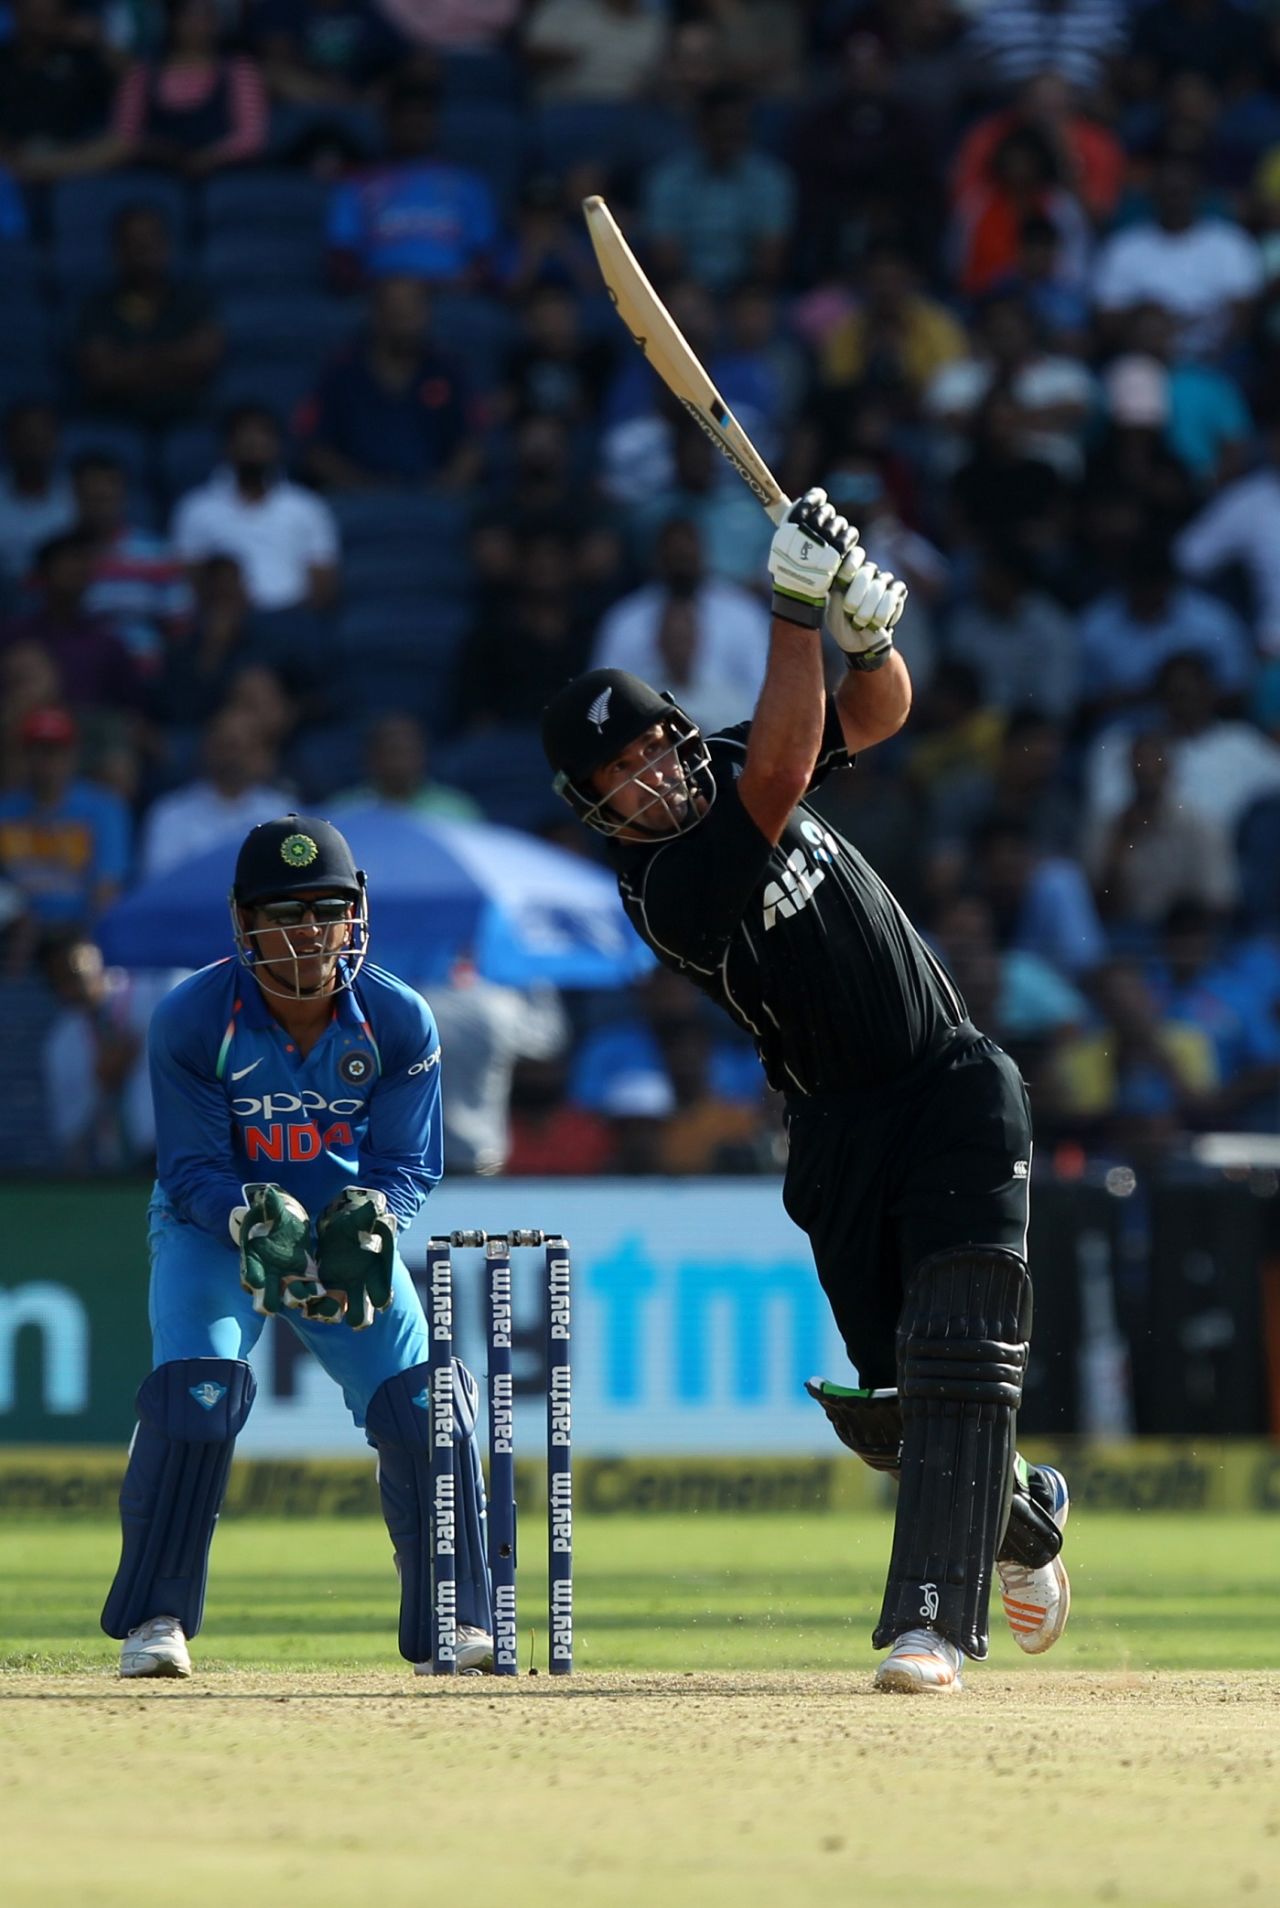 Colin de Grandhomme launches a six down the ground, India v New Zealand, 2nd ODI, Pune, 25 October, 2017